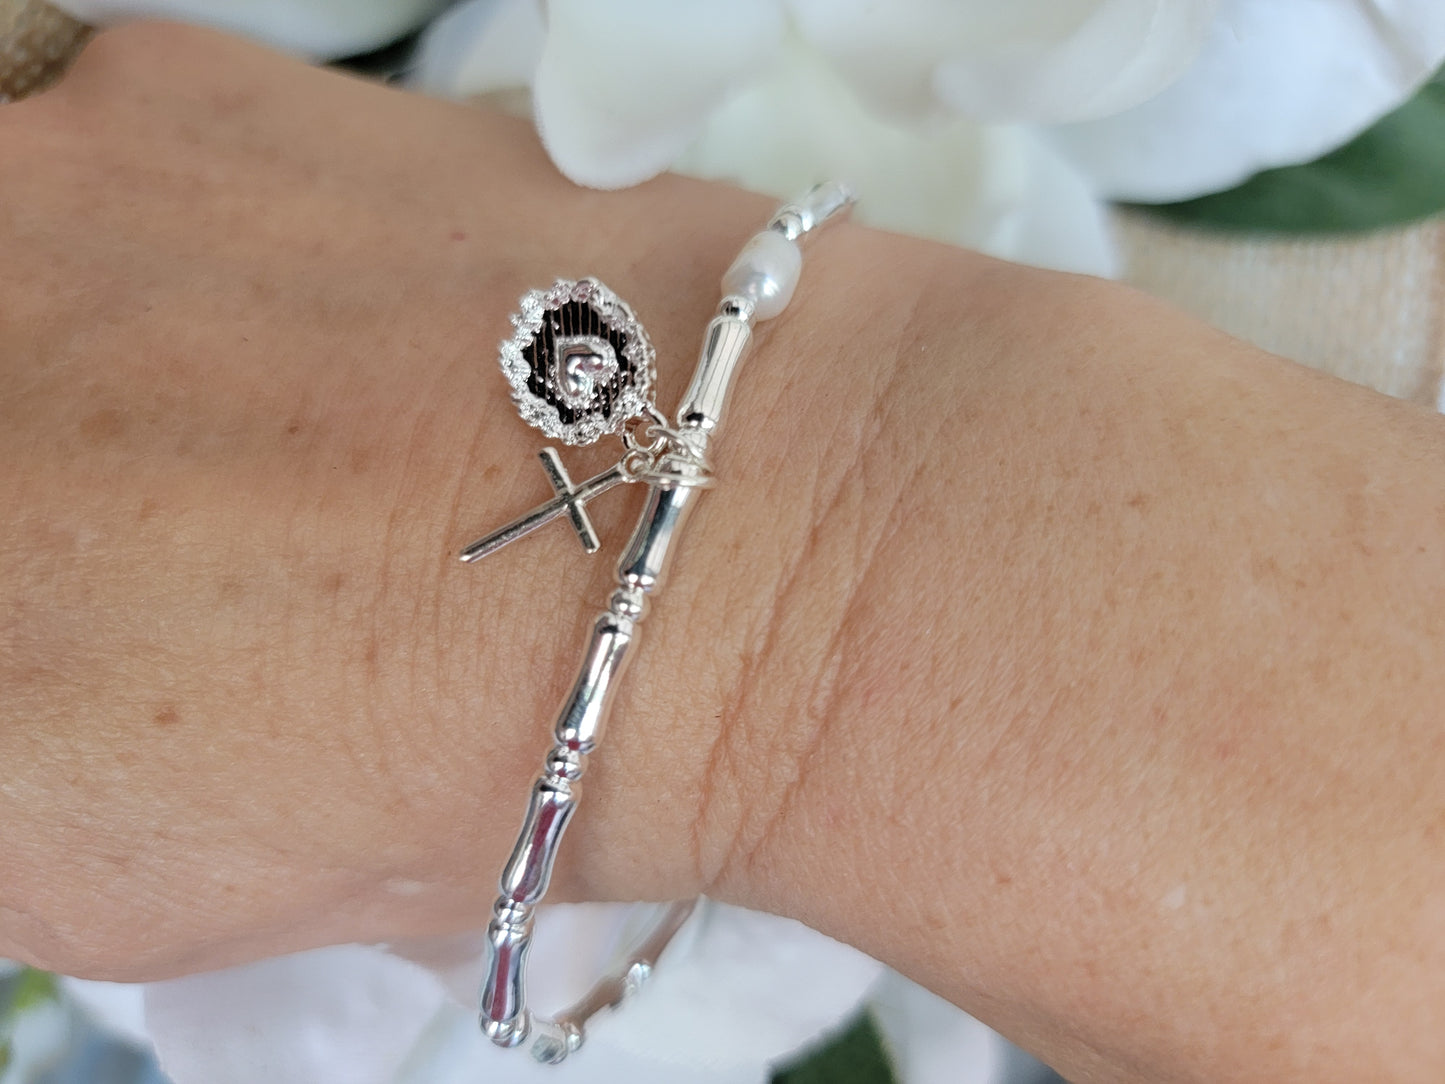 Sterling silver bracelet with a pearl and 2 charms